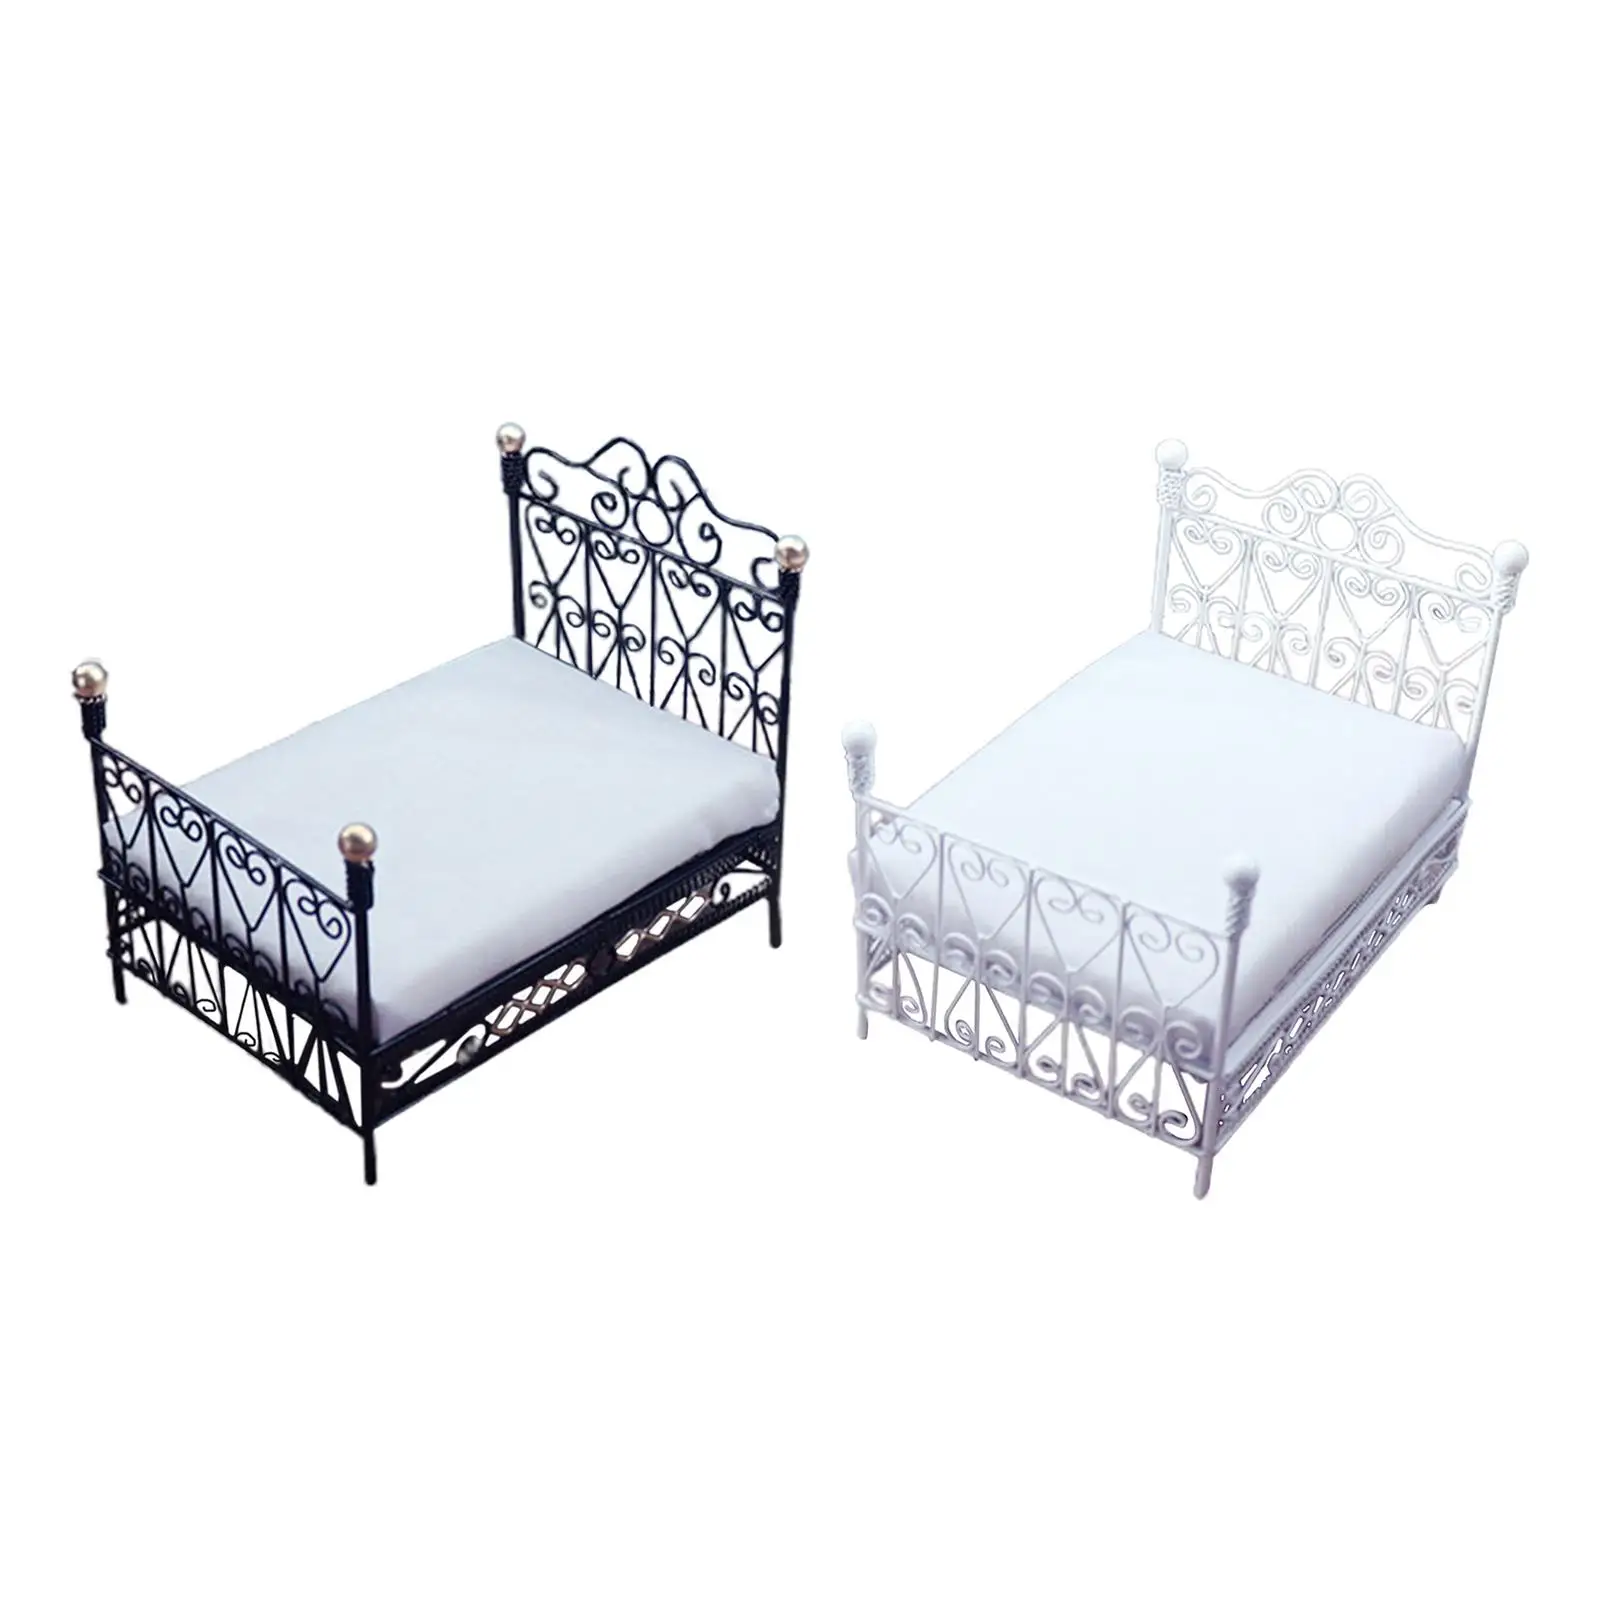 Miniature Double Bed Furniture for 1:12 Scale Doll House Bedroom Decor